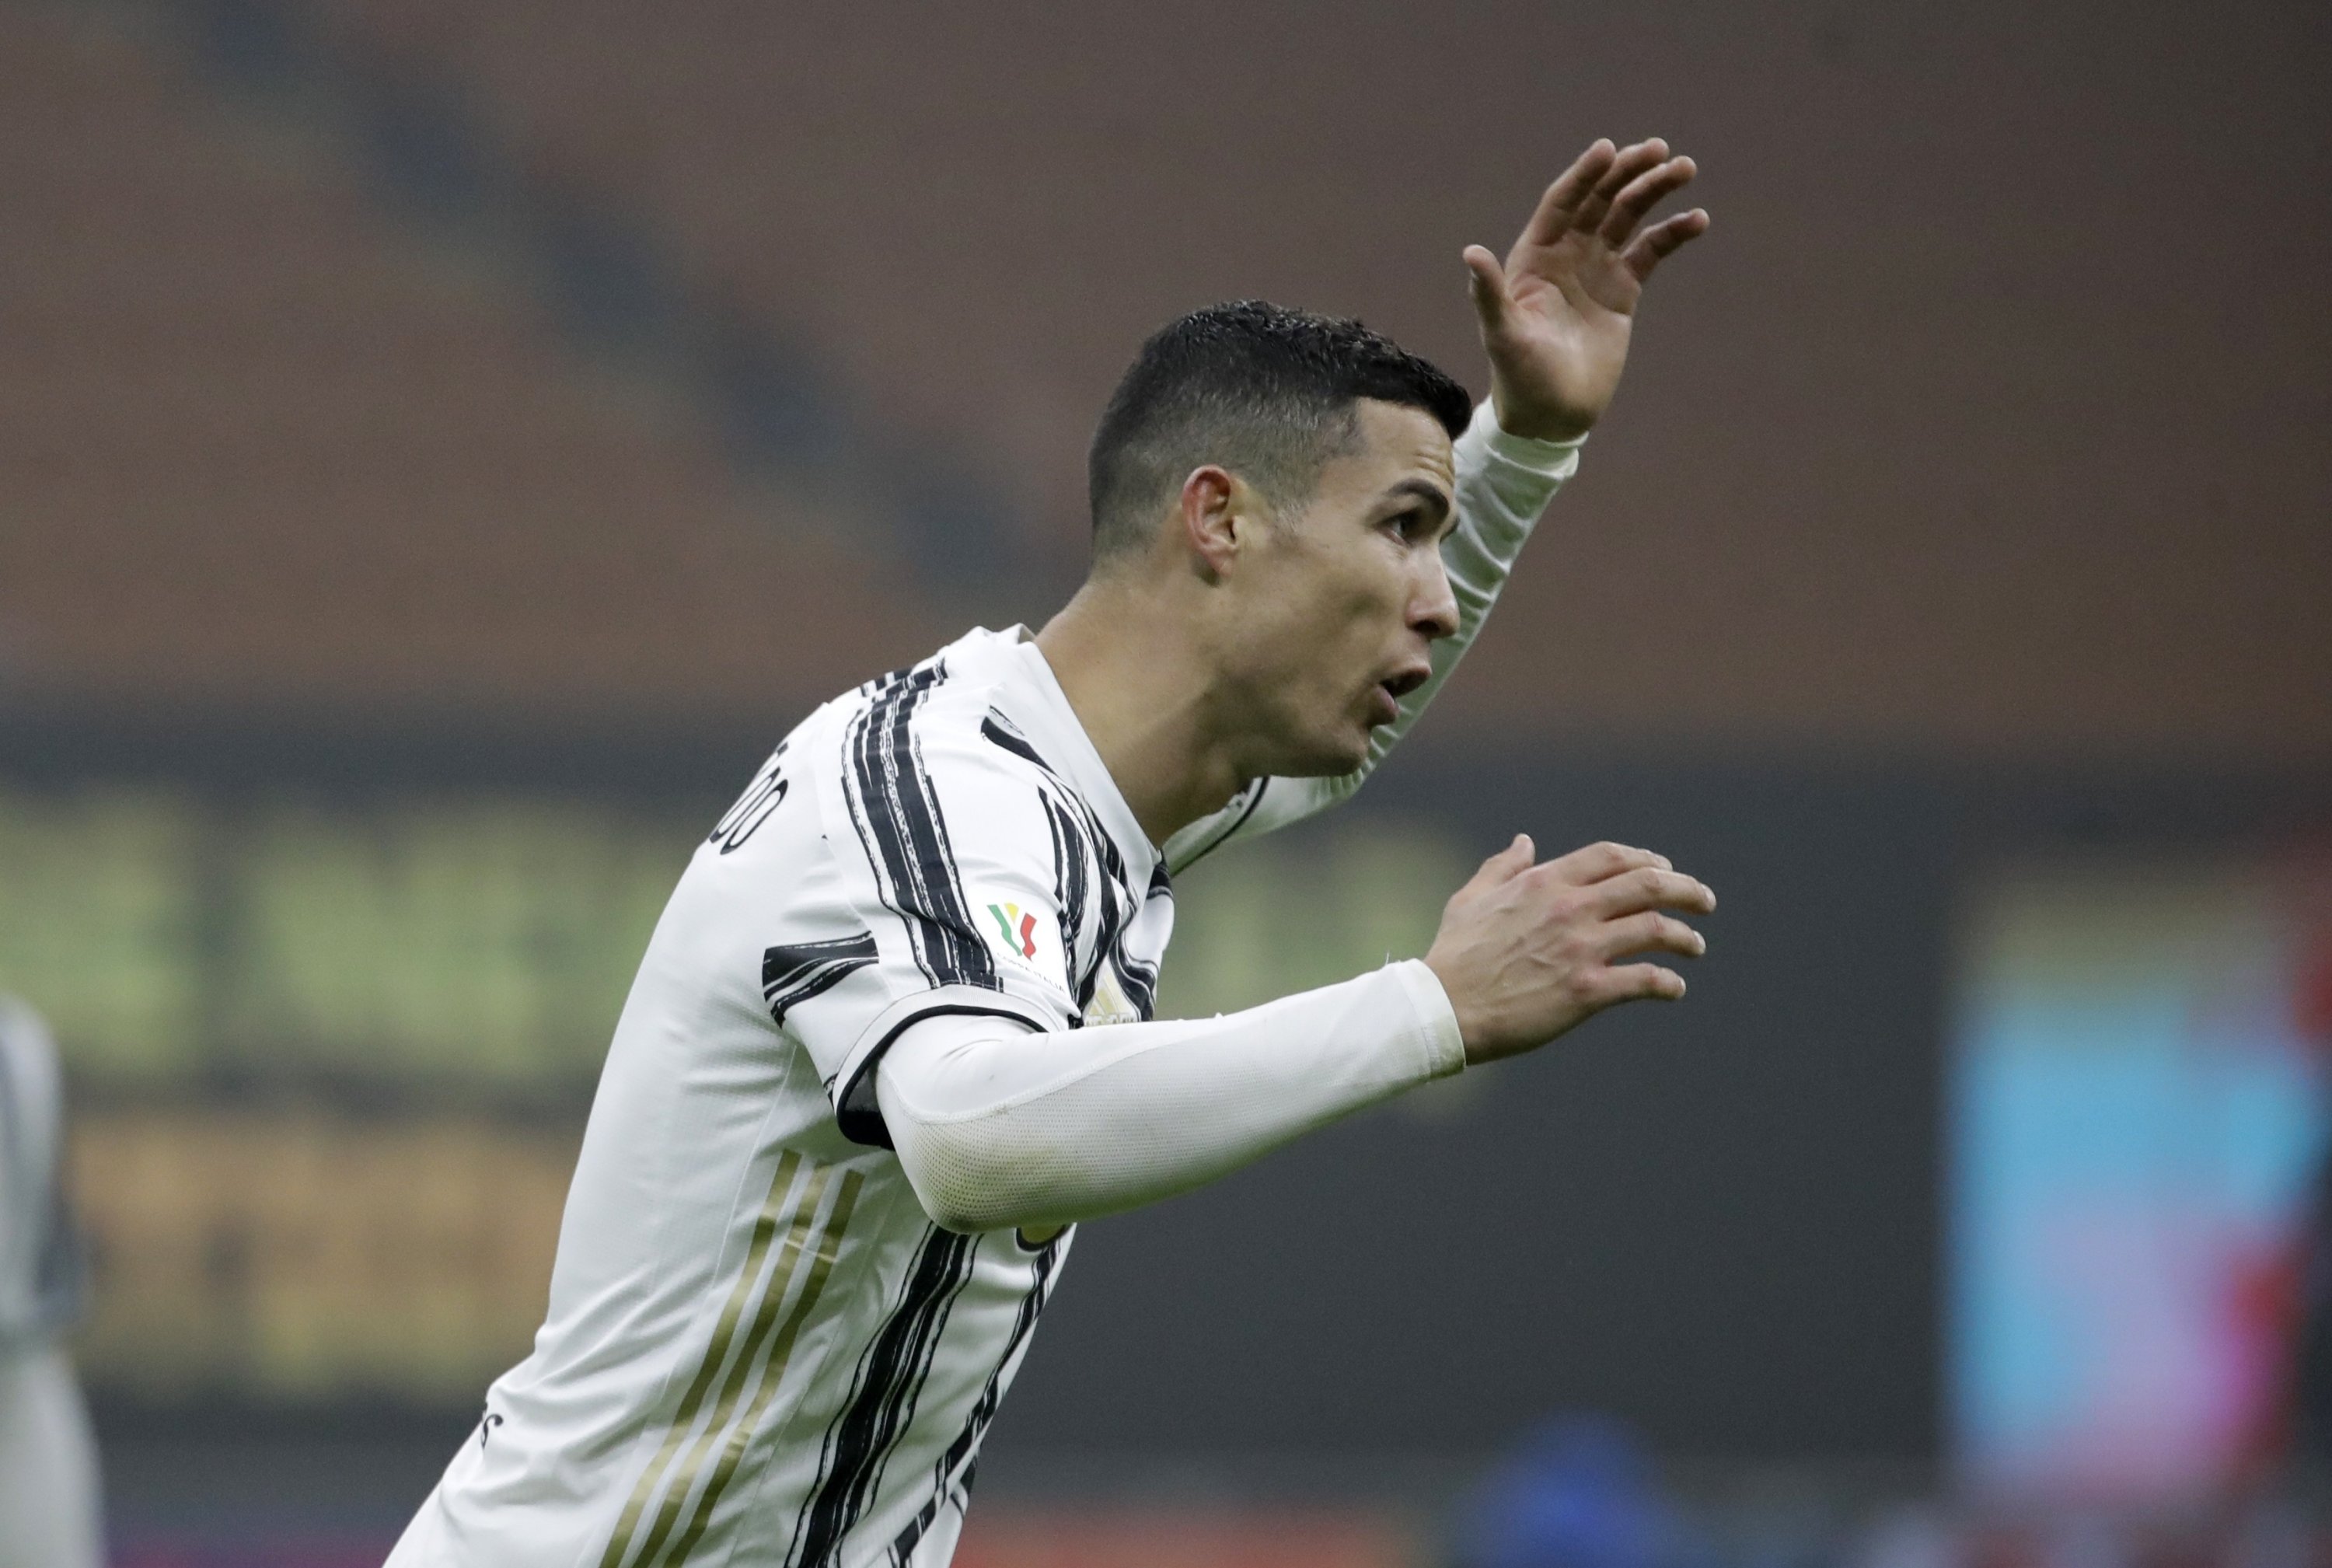 Juventus' Cristiano Ronaldo argues with the referee during the Italian Cup semifinal against Inter Milan at the San Siro, Milan, Italy, Feb. 2, 2021. (AP Photo)